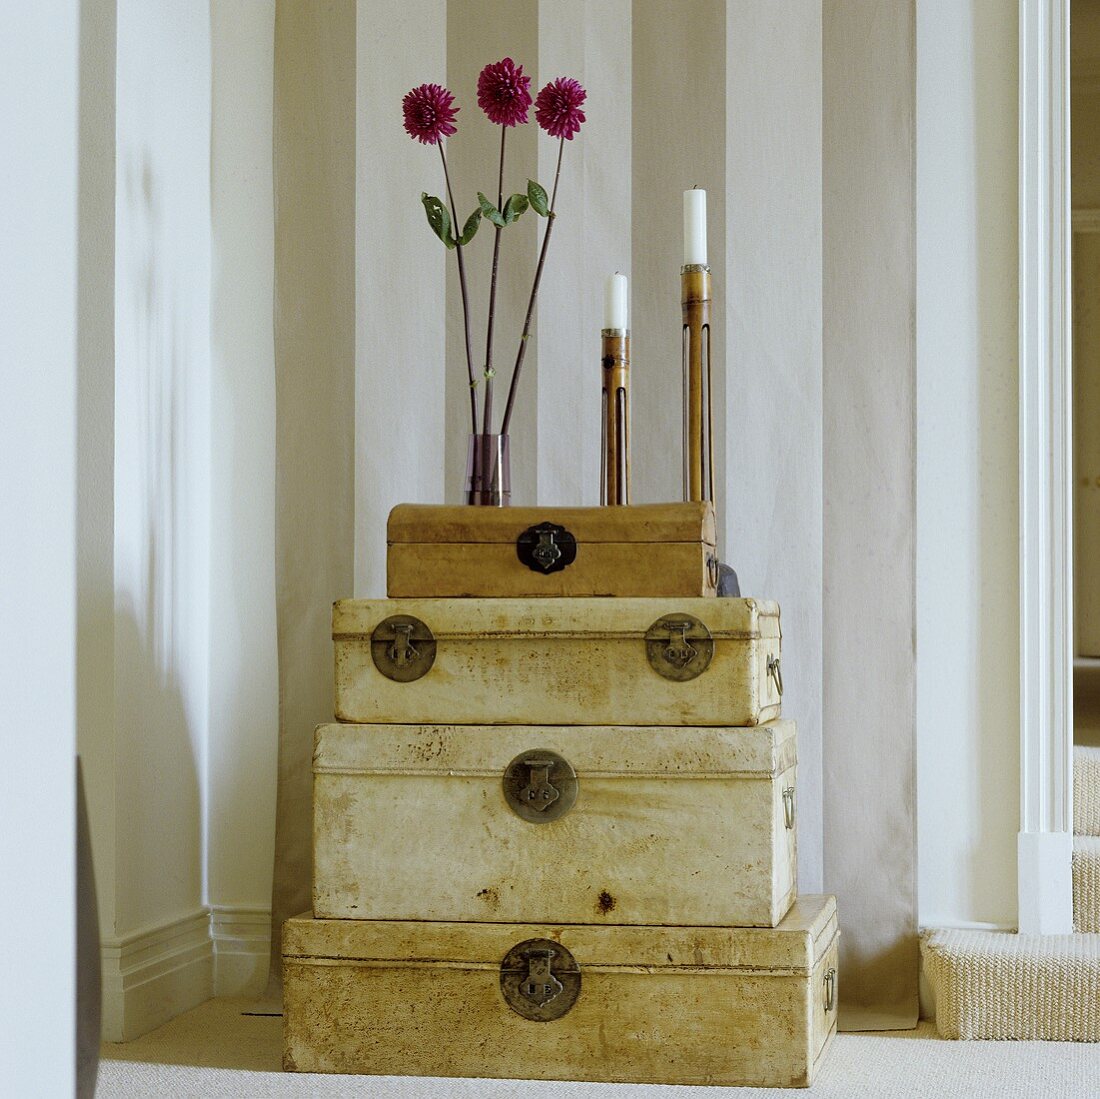 A vase of flowers and a a candlestick on a stack of antique trunks against a striped wall